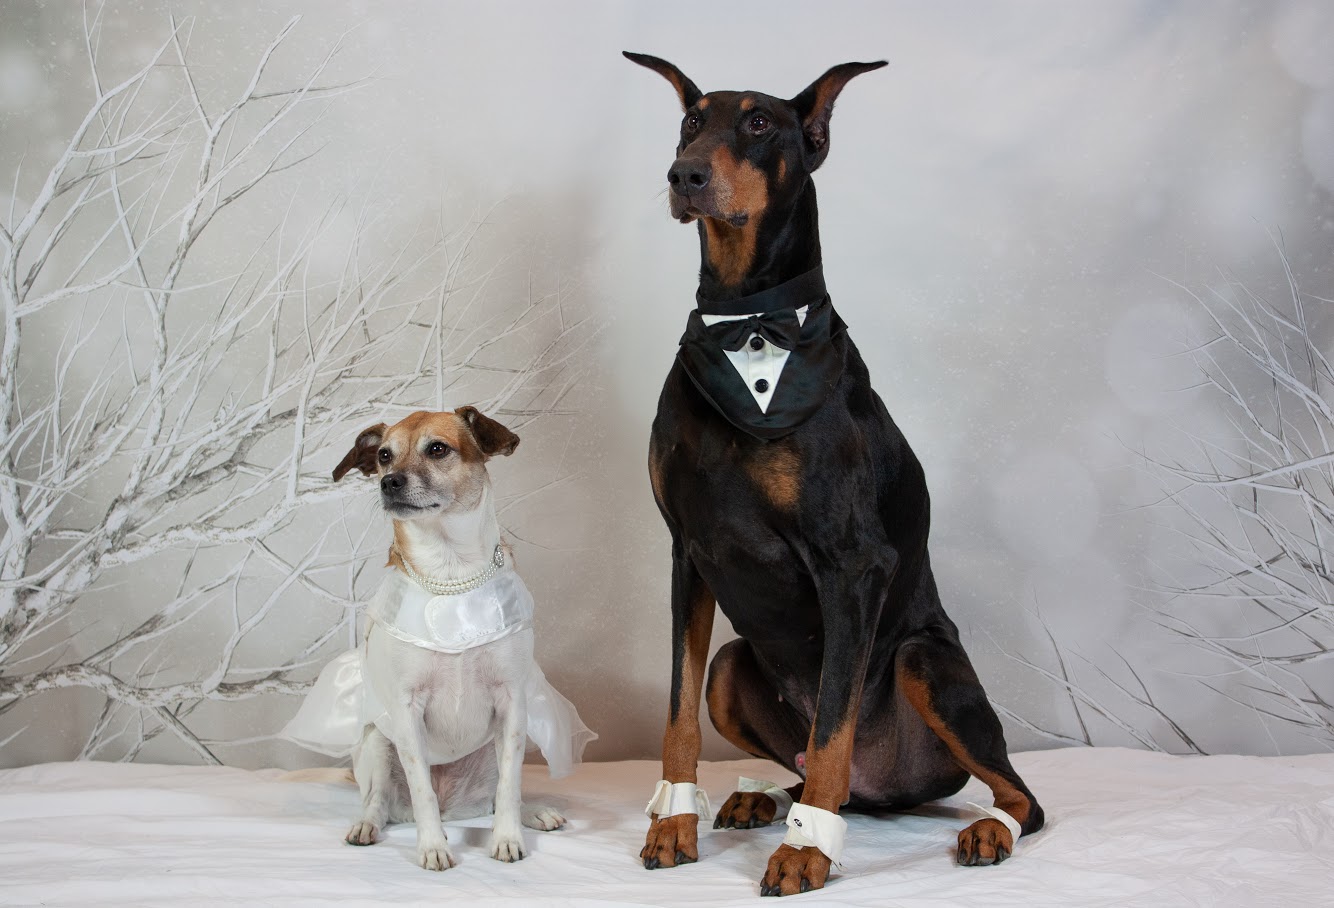 Doggie day care wedding at Hounds Town USA